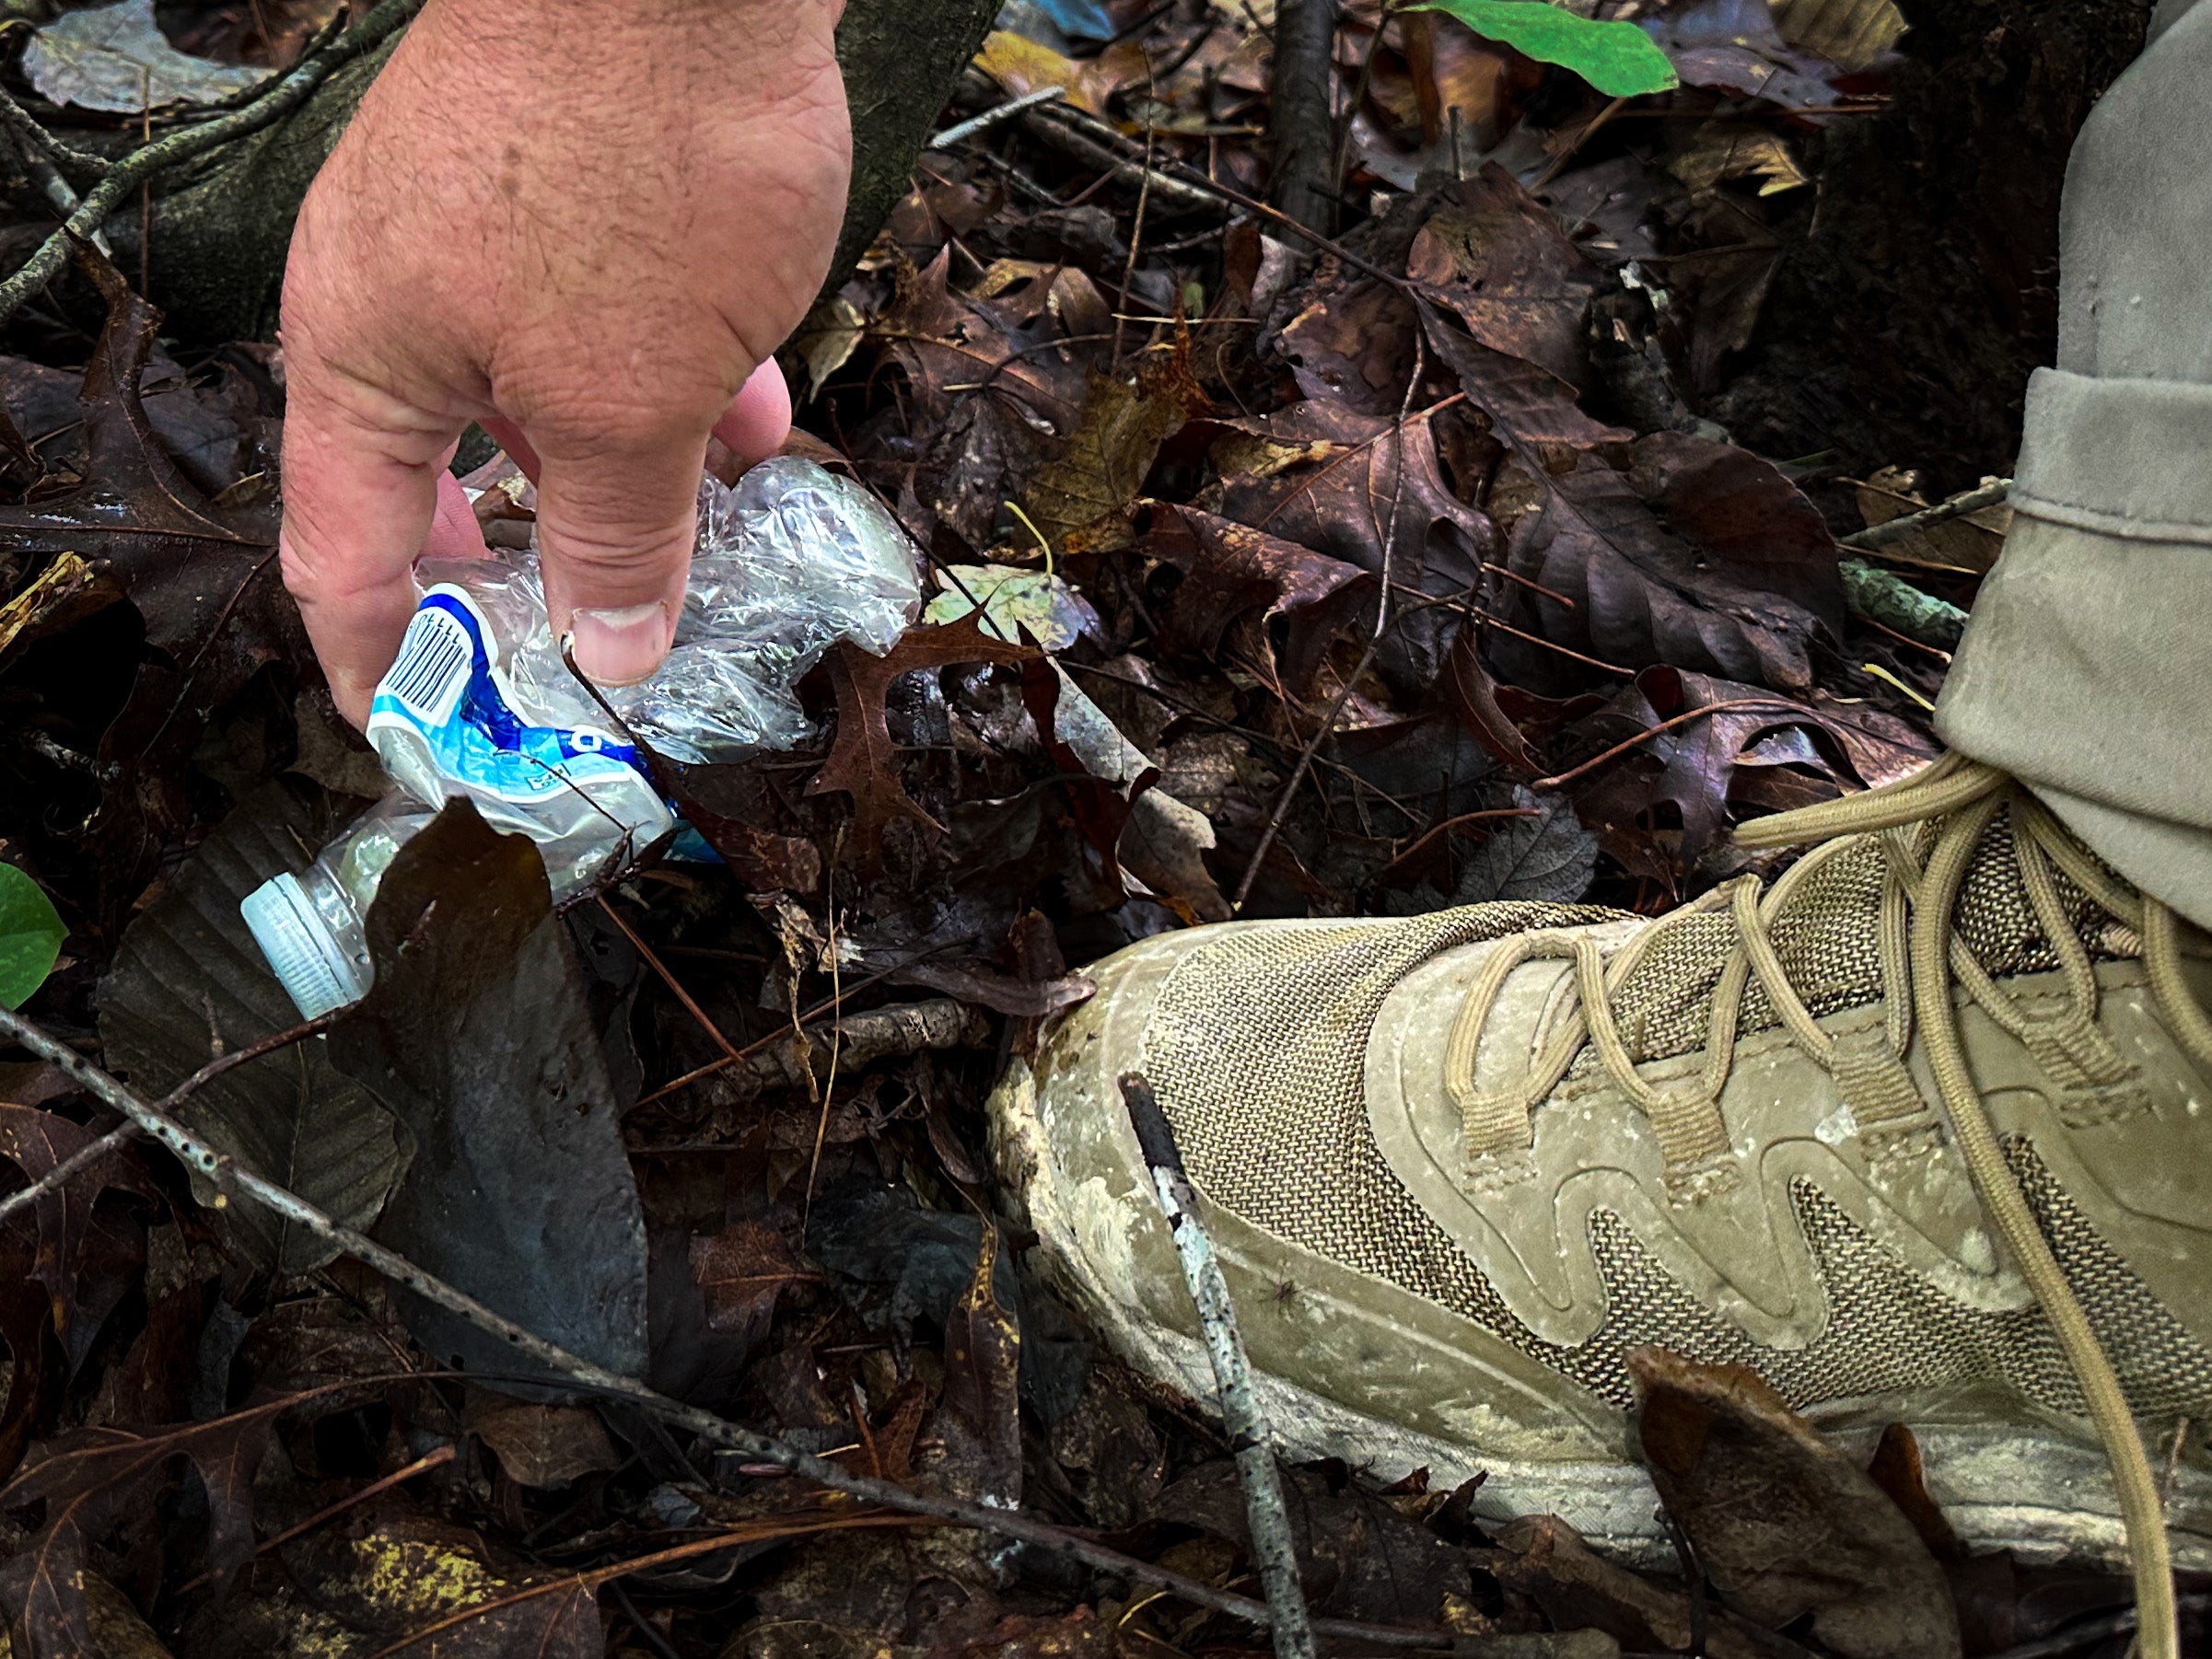 A camper picks up a piece of trash on the ground in the woods that is next to his hiking boot.